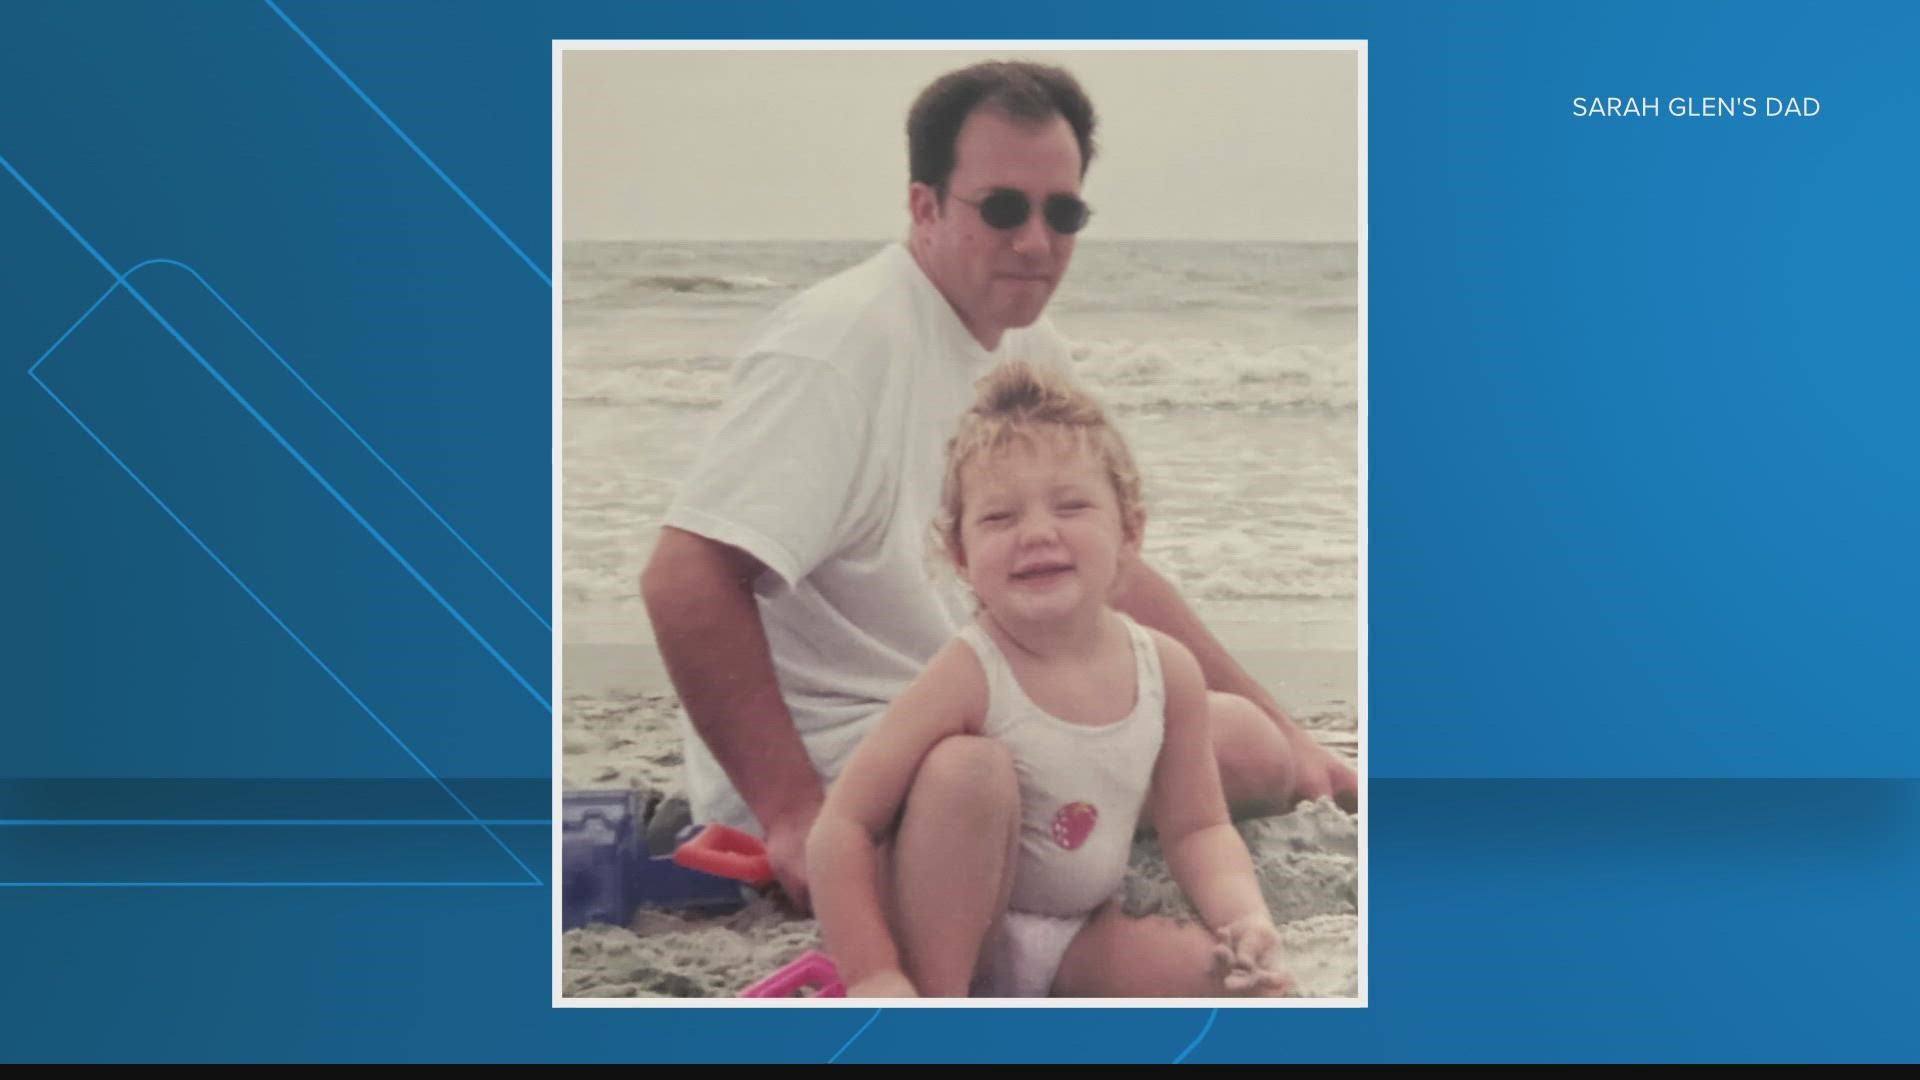 Happy Father's Day, First Coast!